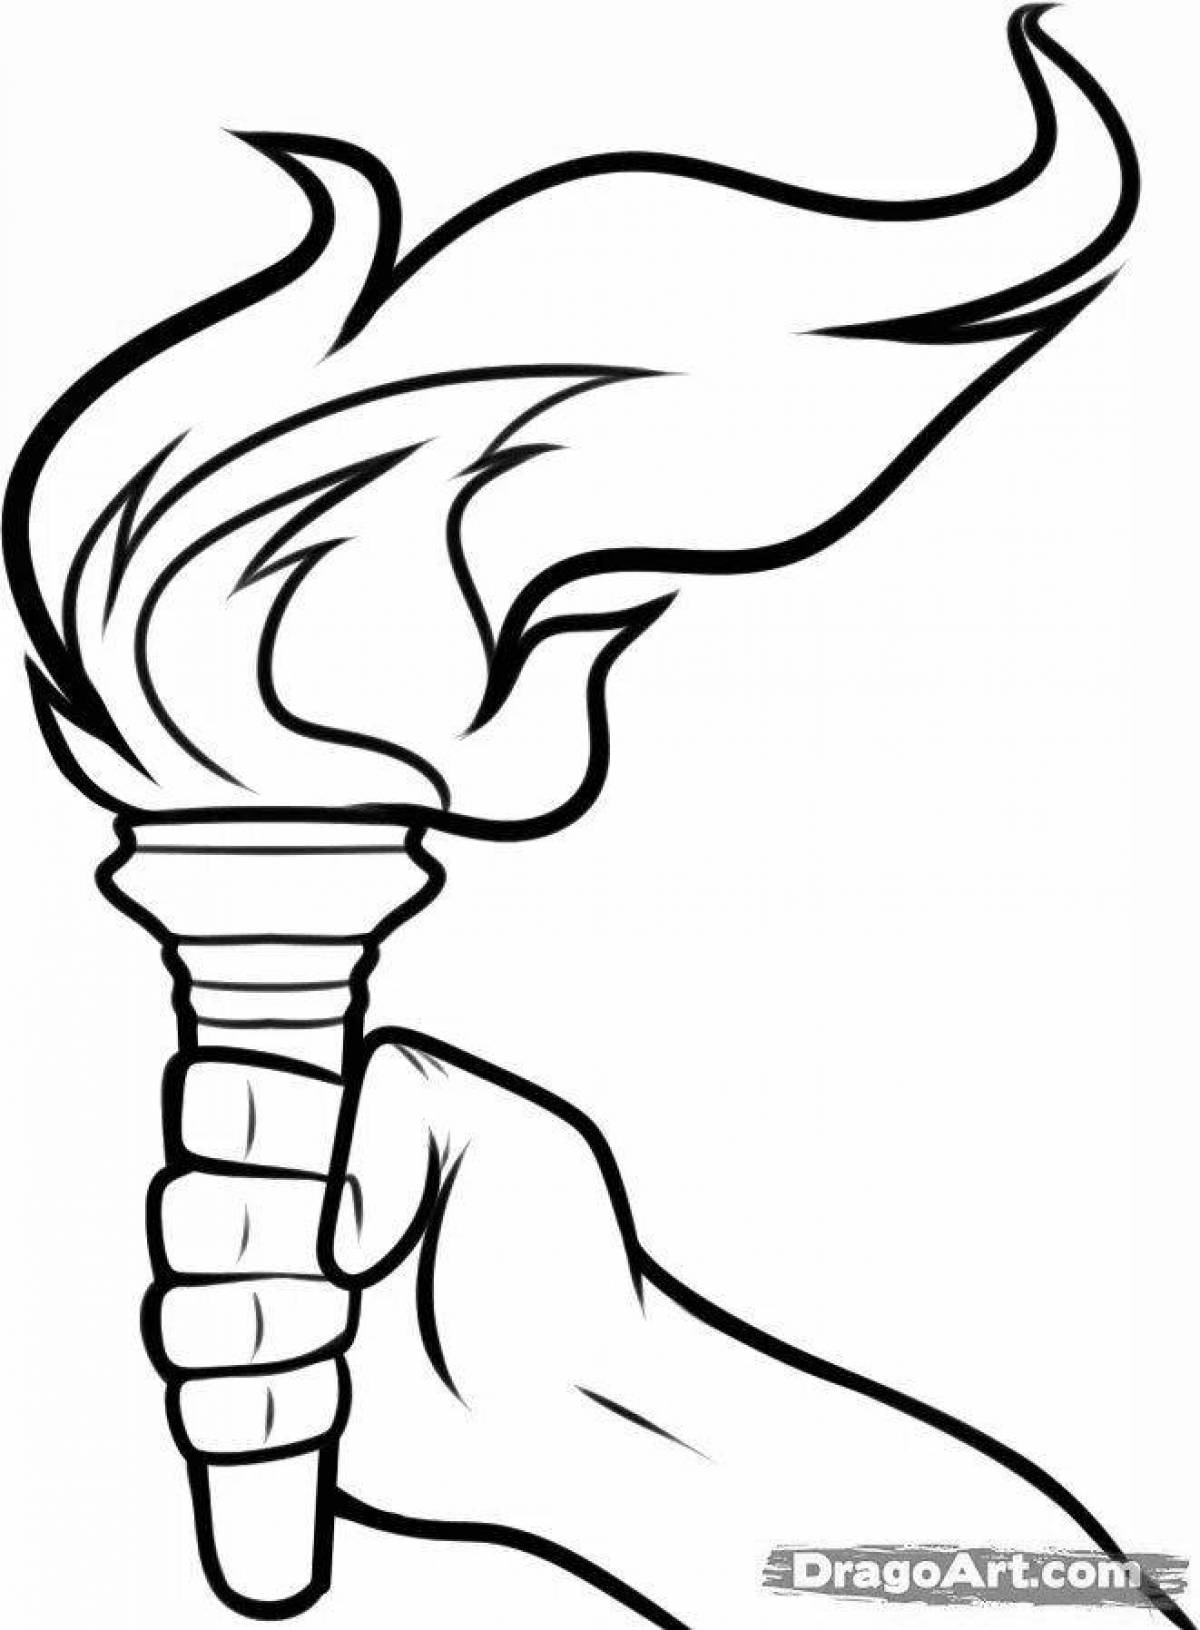 Attractive torch coloring page